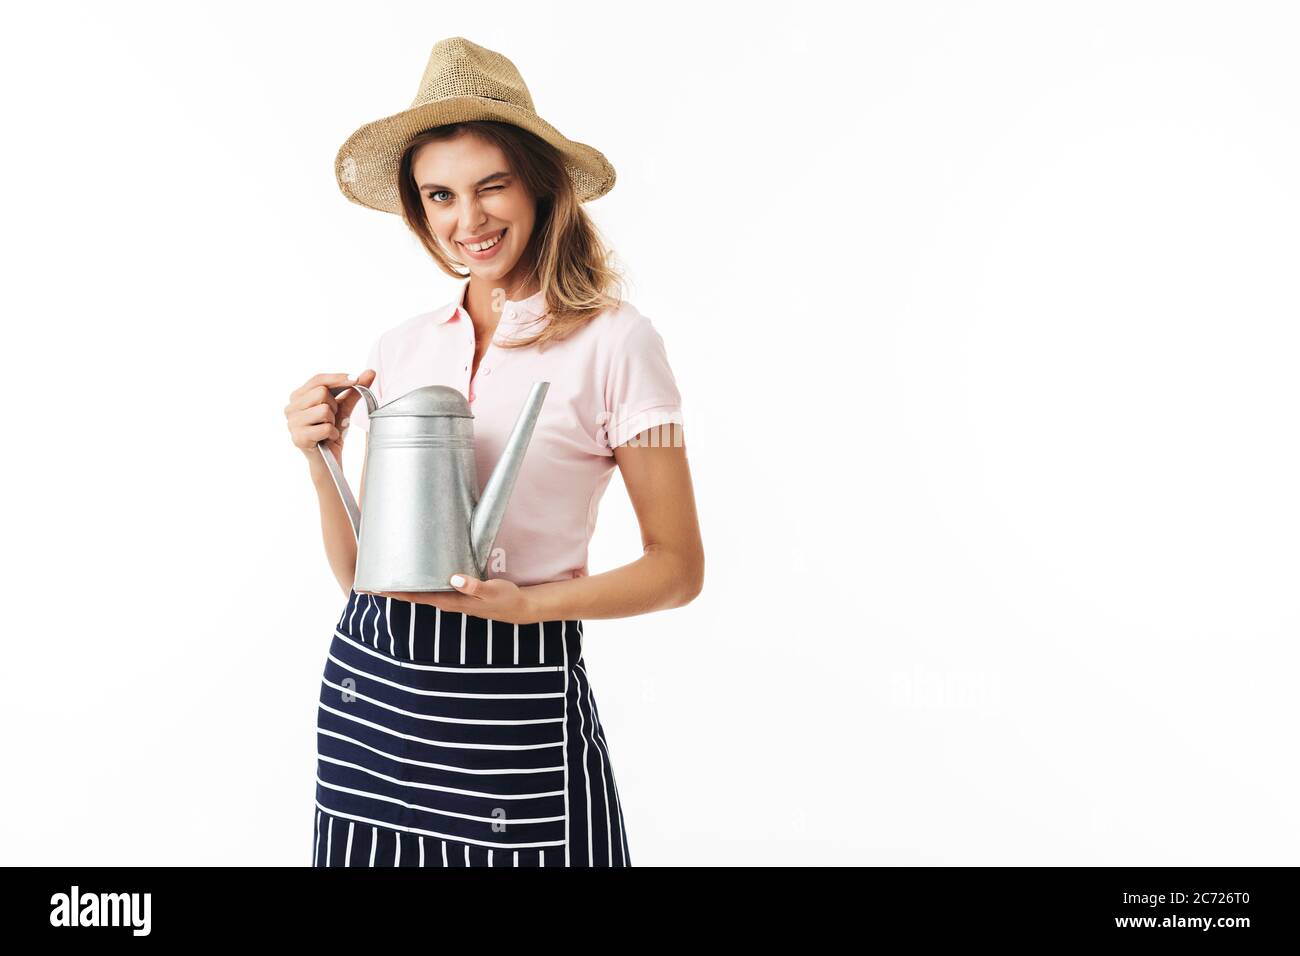 Young smiling woman in straw hat and striped apron happily winking on camera holding watering pot in hands over white background Stock Photo